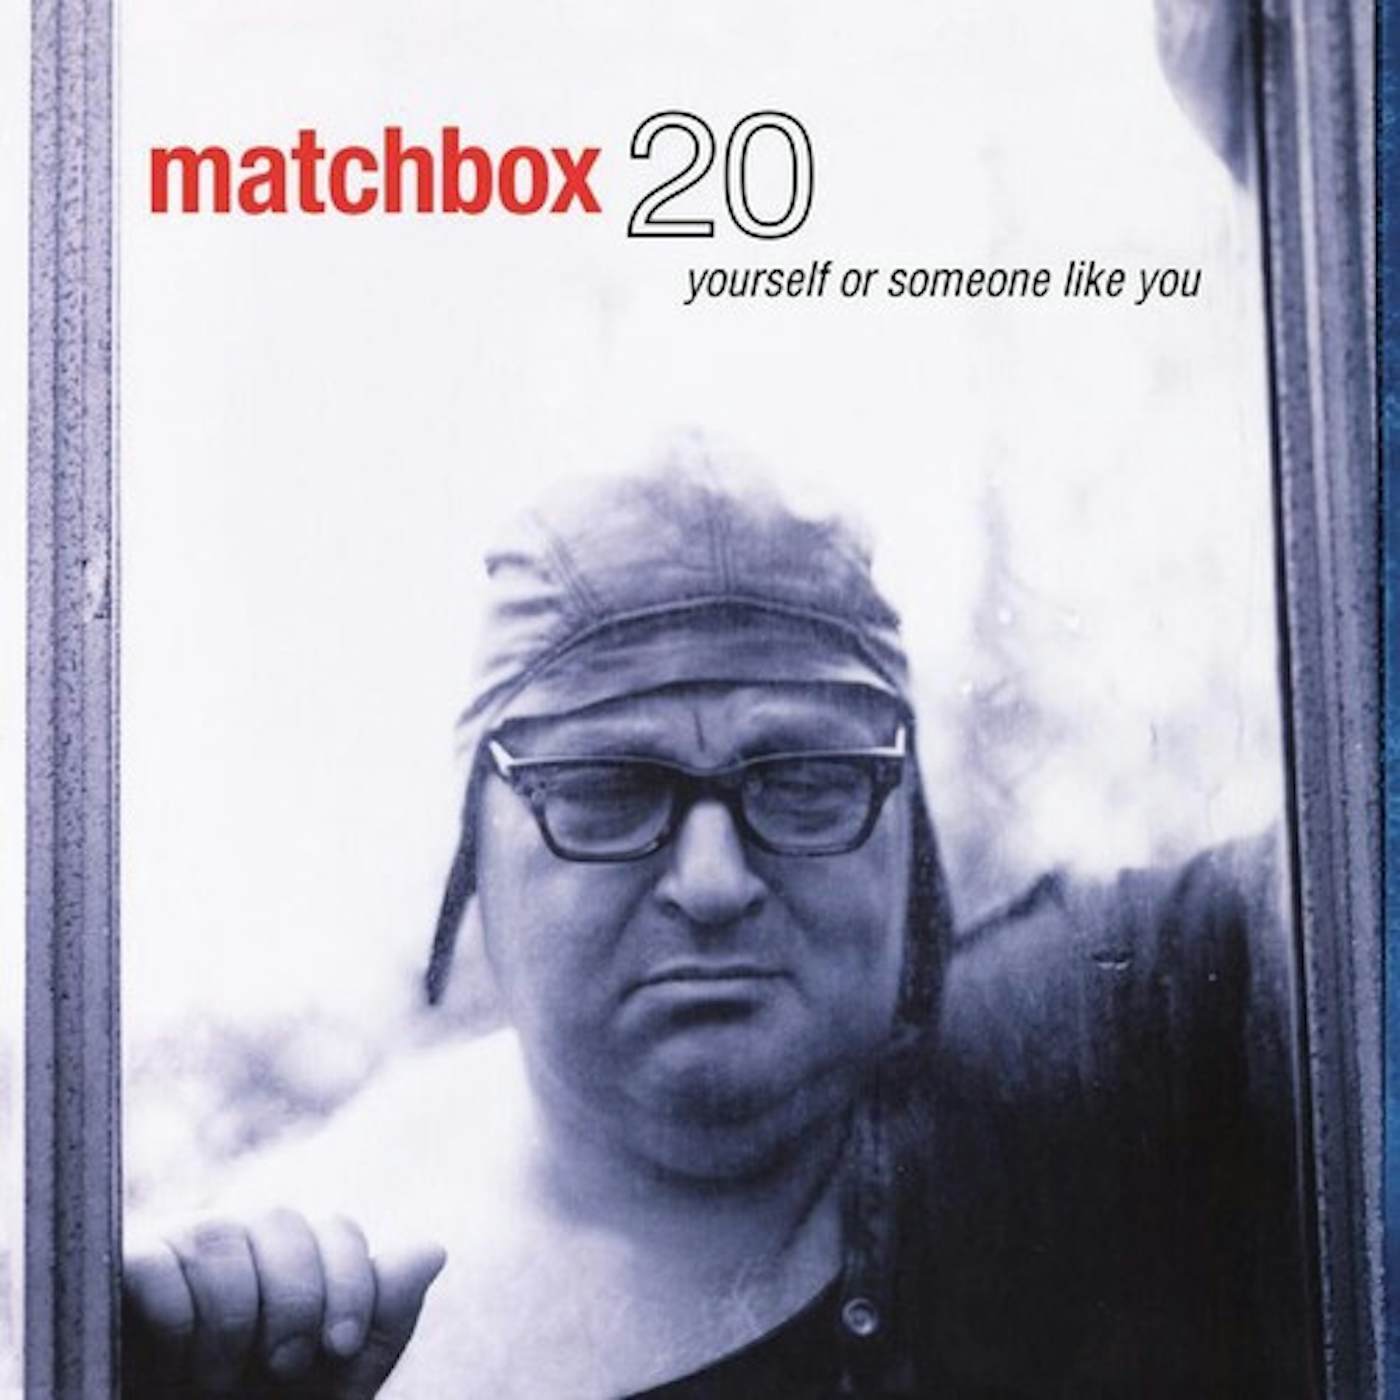 Matchbox 20 YOURSELF OR SOMEONE LIKE YOU Vinyl Record